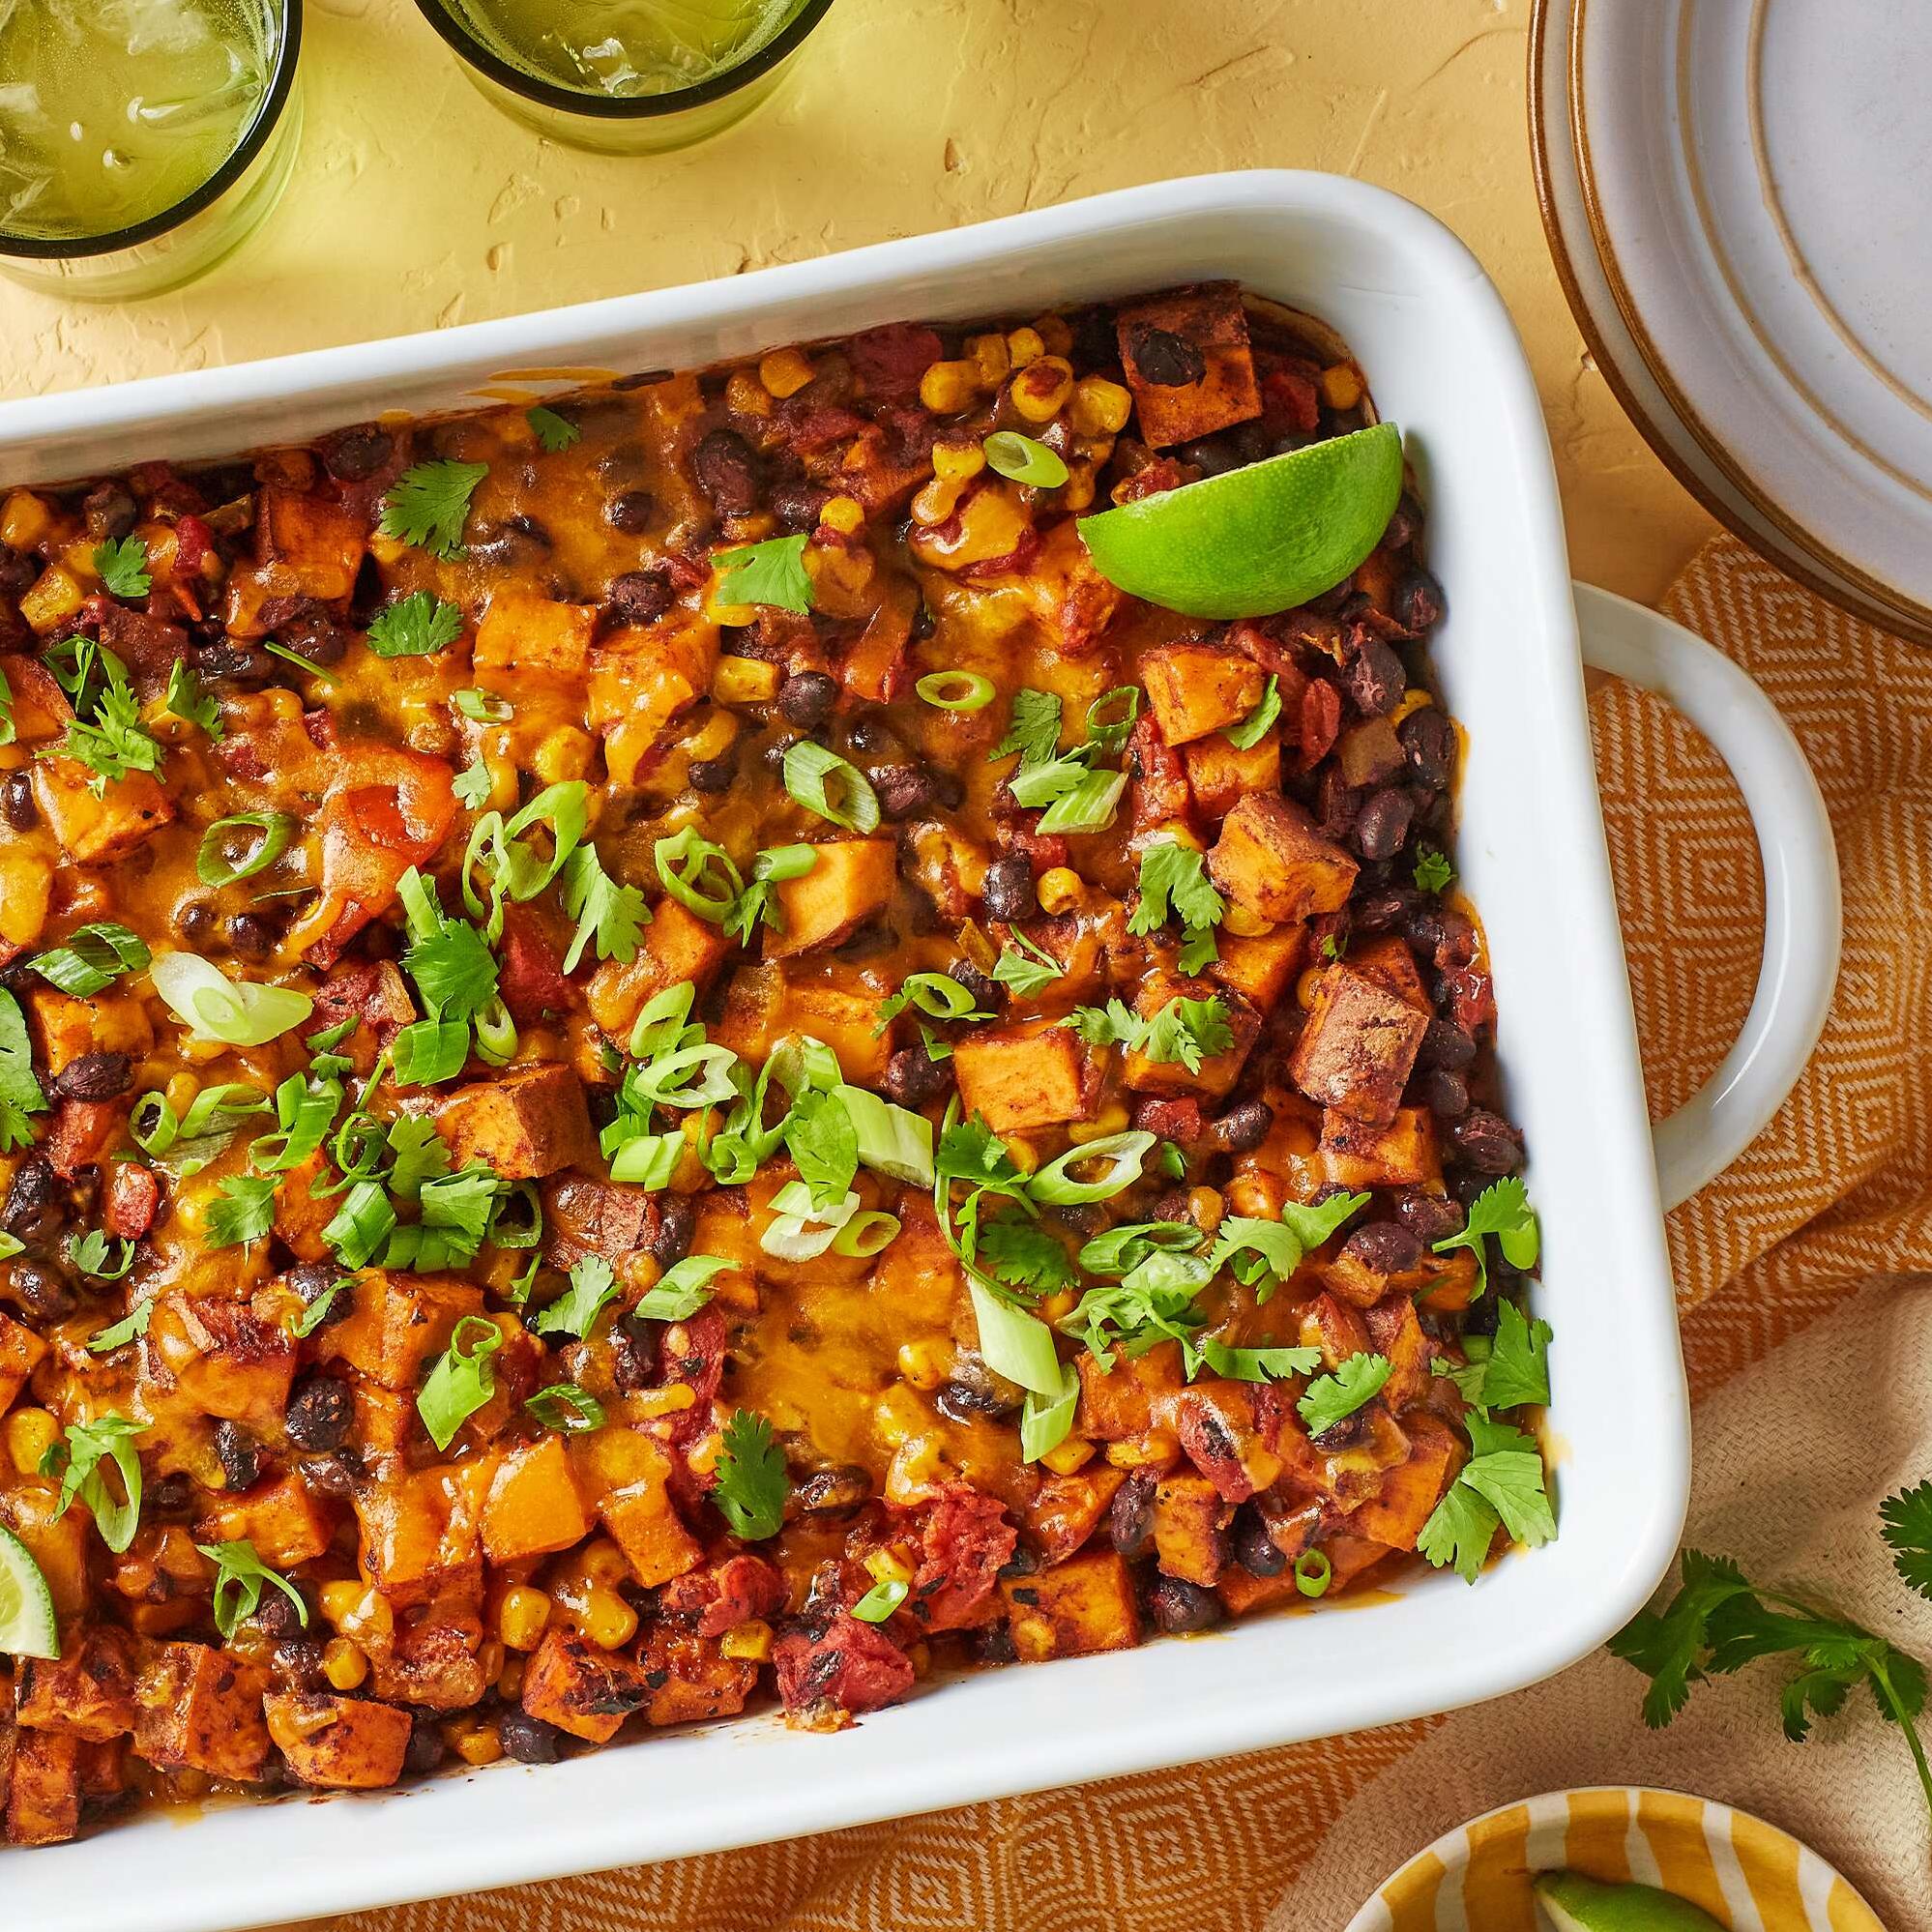  Who says vegetarian can't be delicious? Just try this bean casserole!